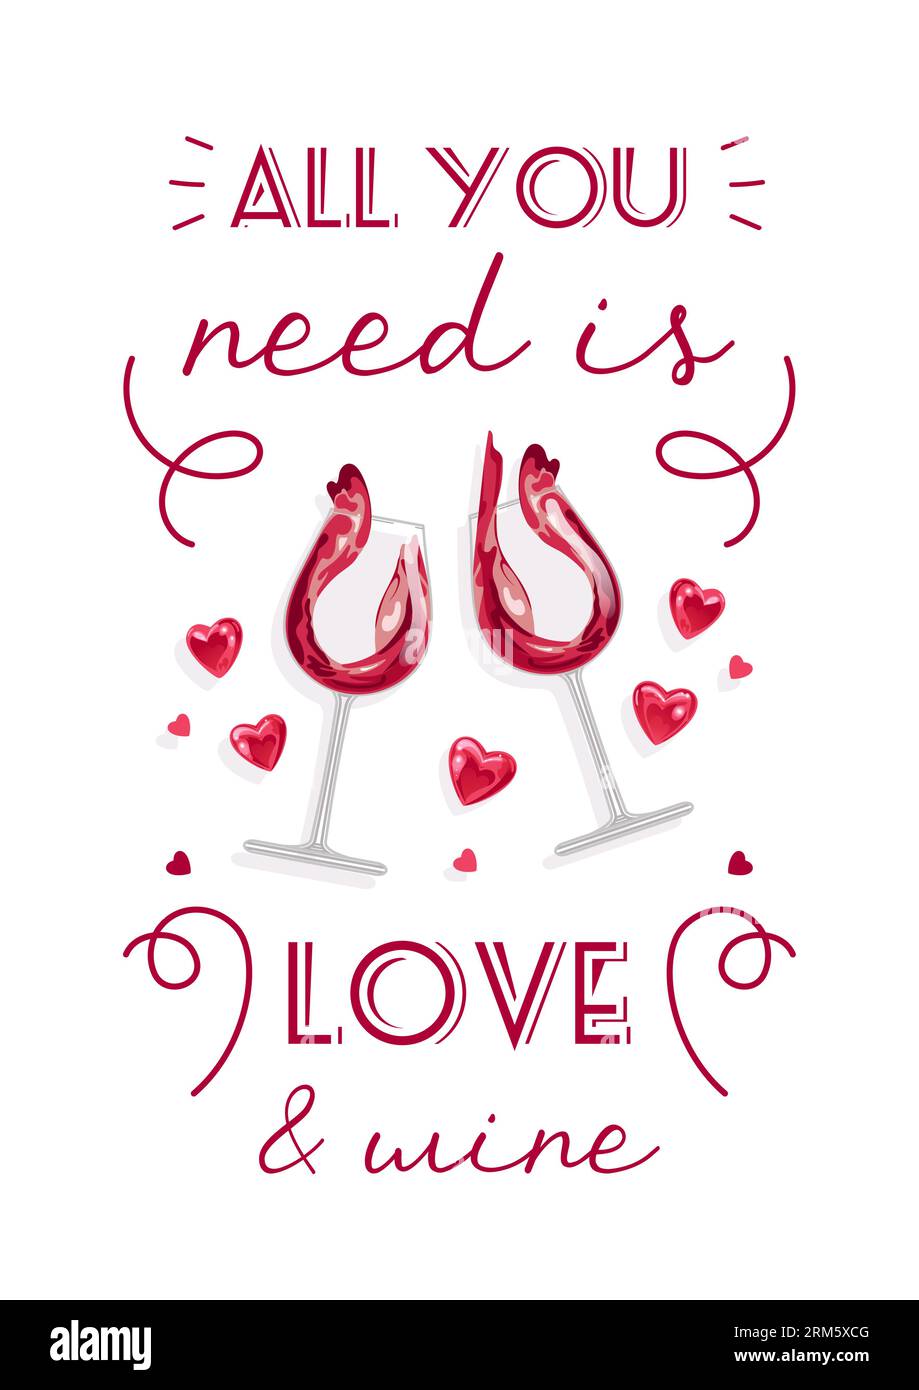 All you need is love and wine. Funny inscription. Red wine is poured into a crystal glass, realistic style. For posters, postcards, design elements Stock Vector